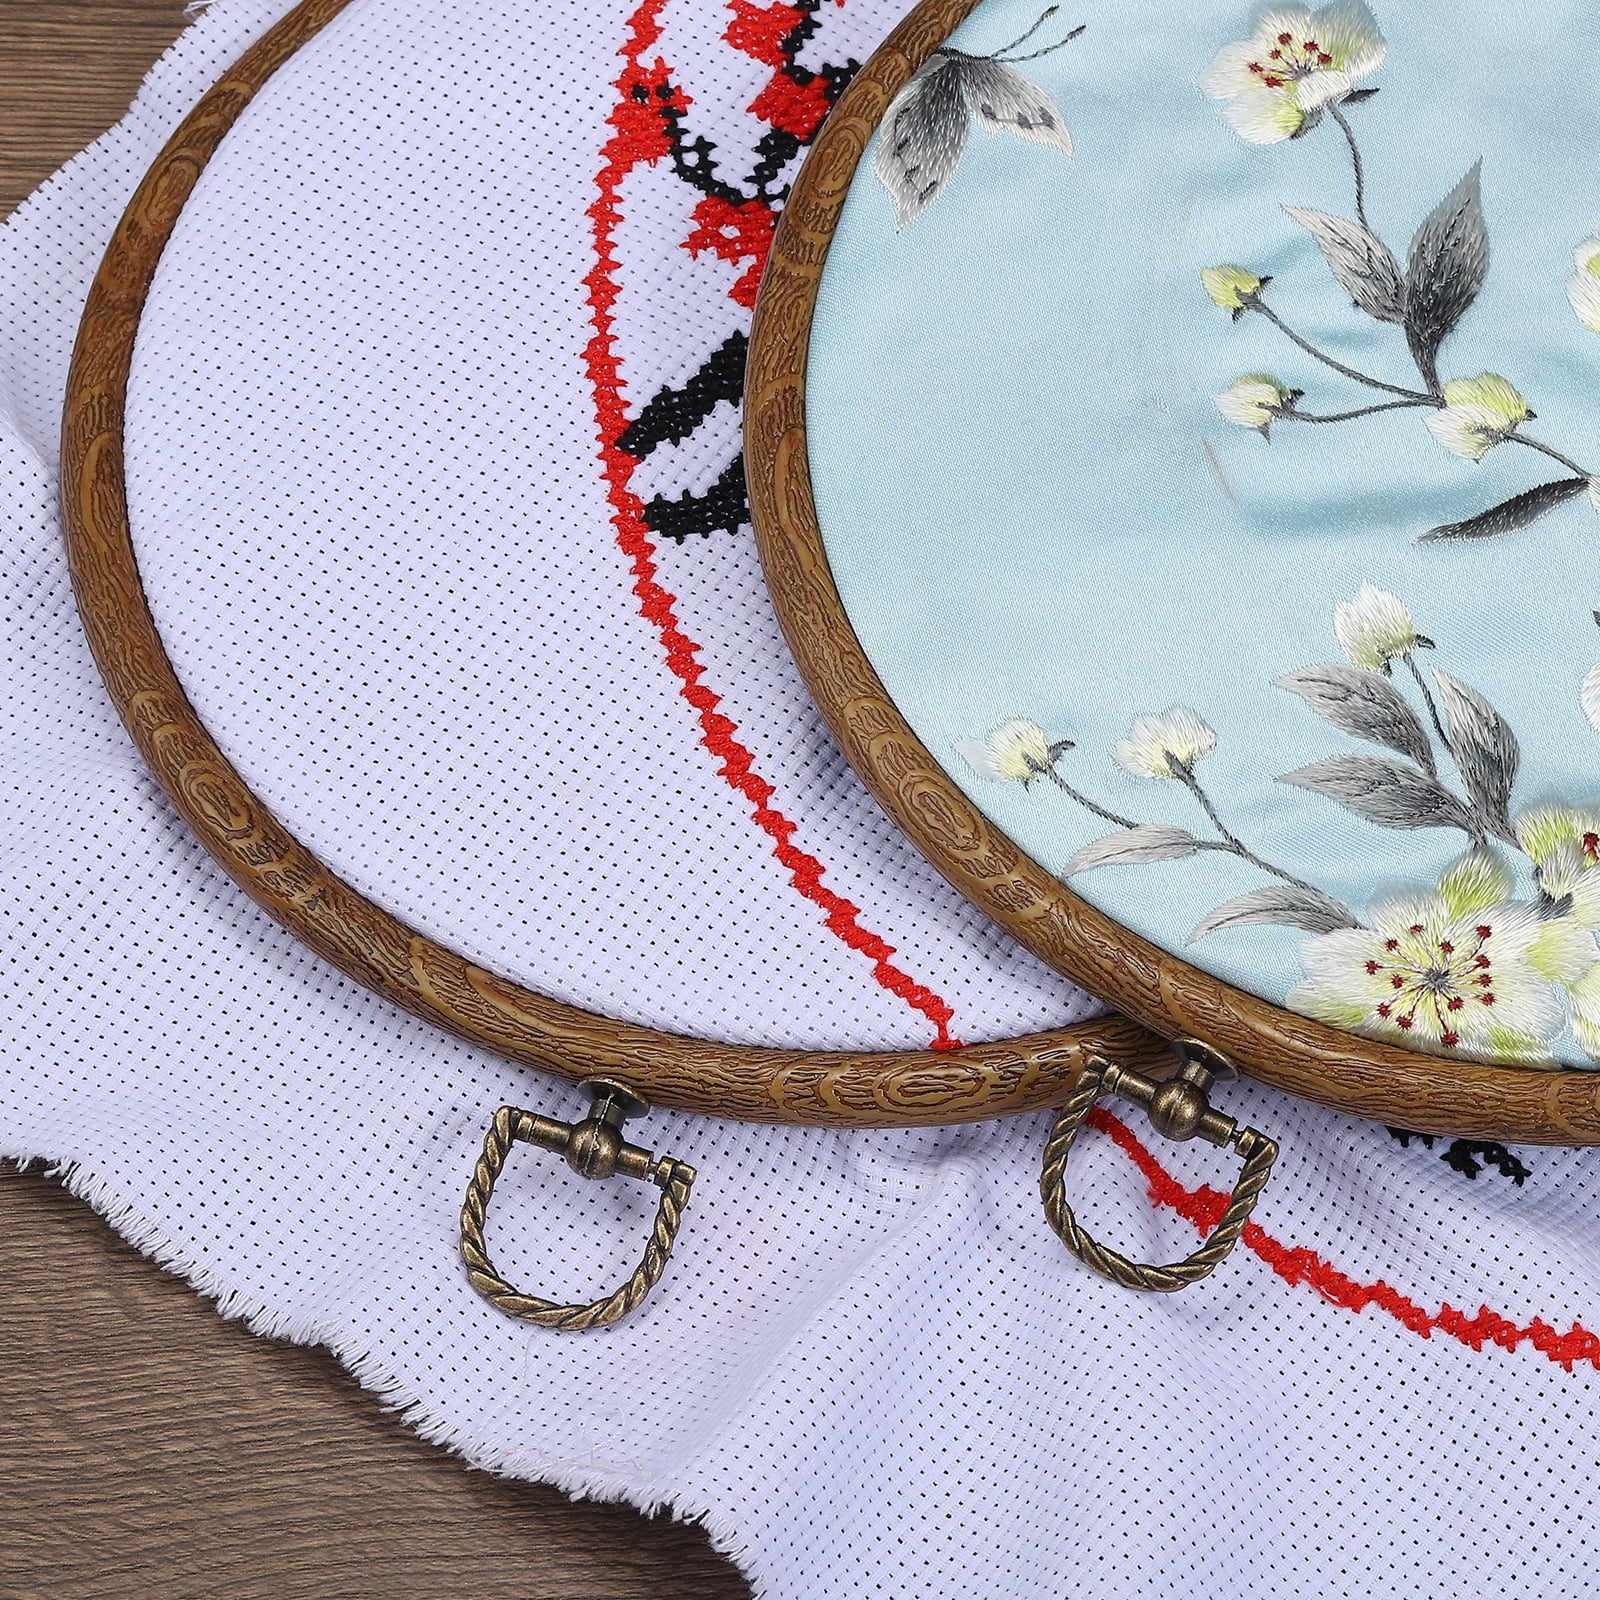 5pcs Oval Embroidery Hoop Set - Display Cross Stitch Hoop Frames Imitated Wood, Decorative Embroidery Hoop Ring for Hanging Sewing Needlepoint